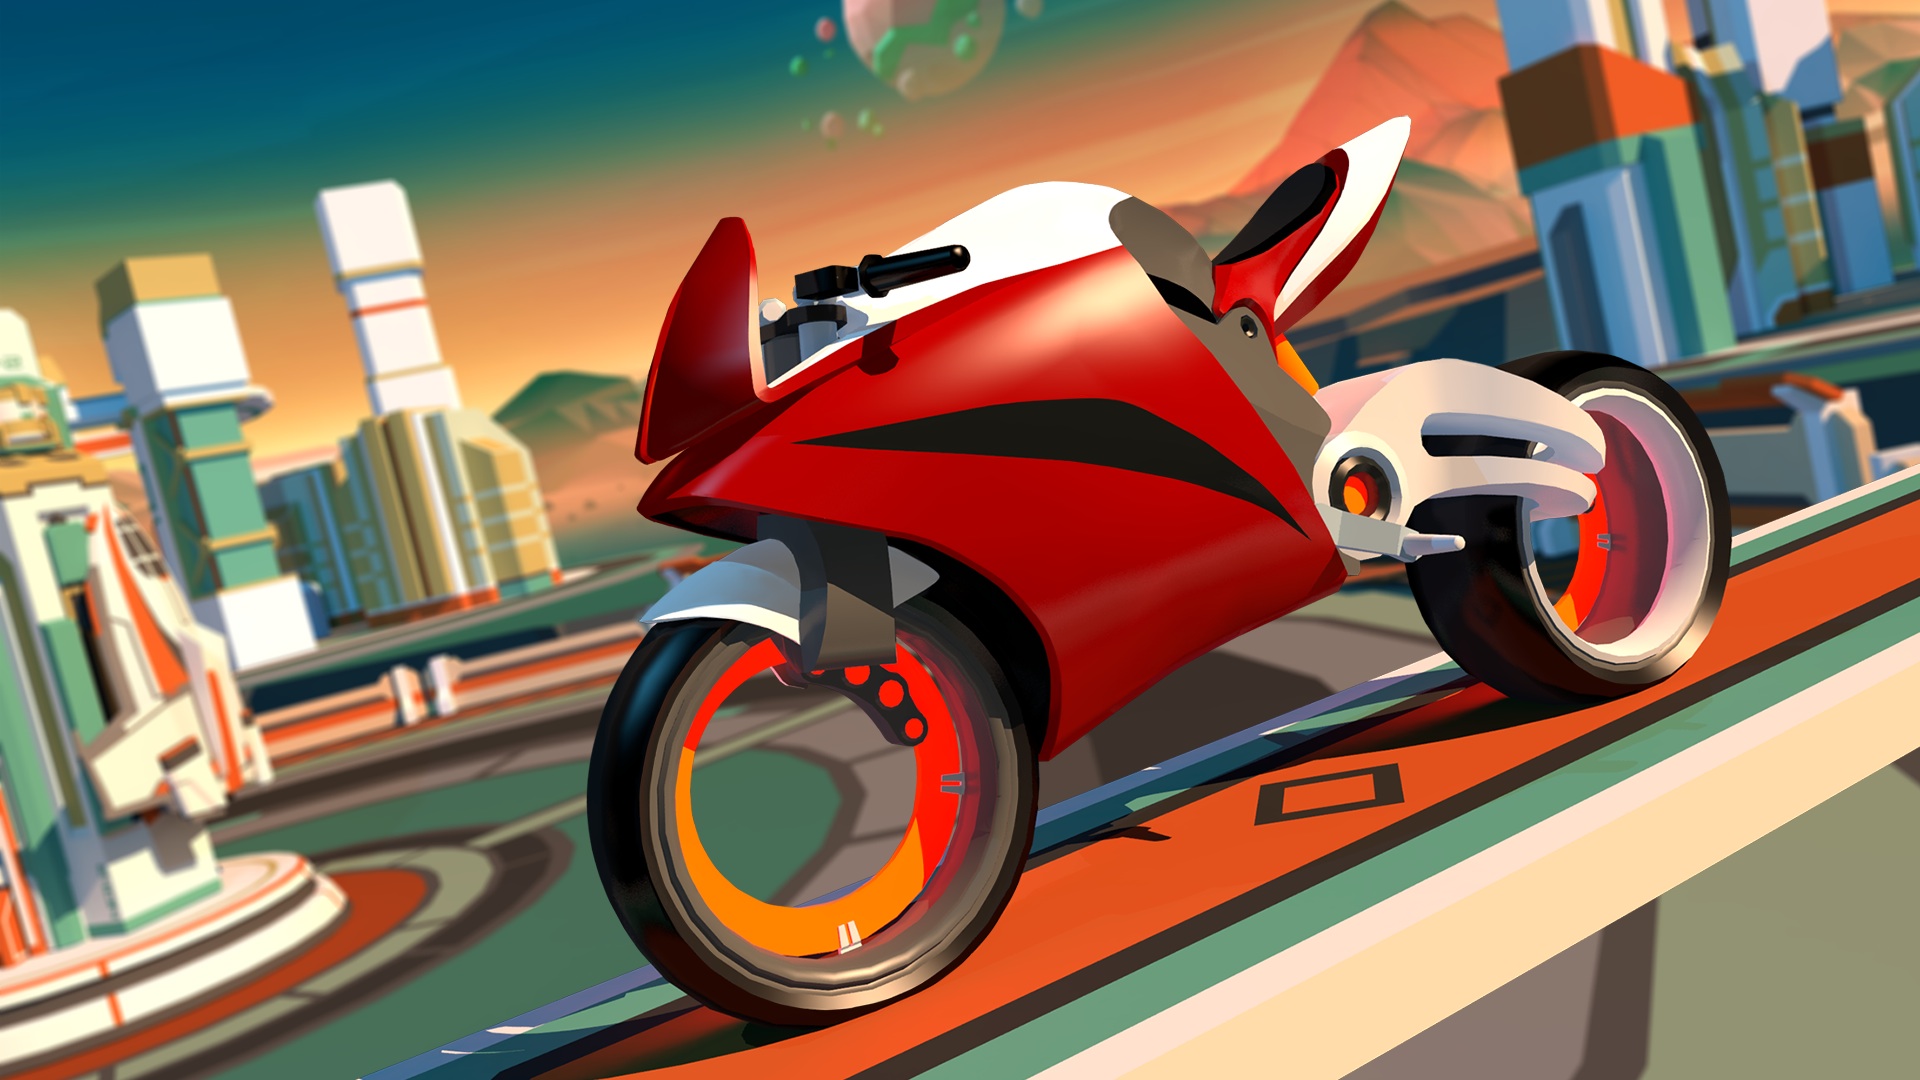 Gravity Rider racing onto iOS and Android devices in early September